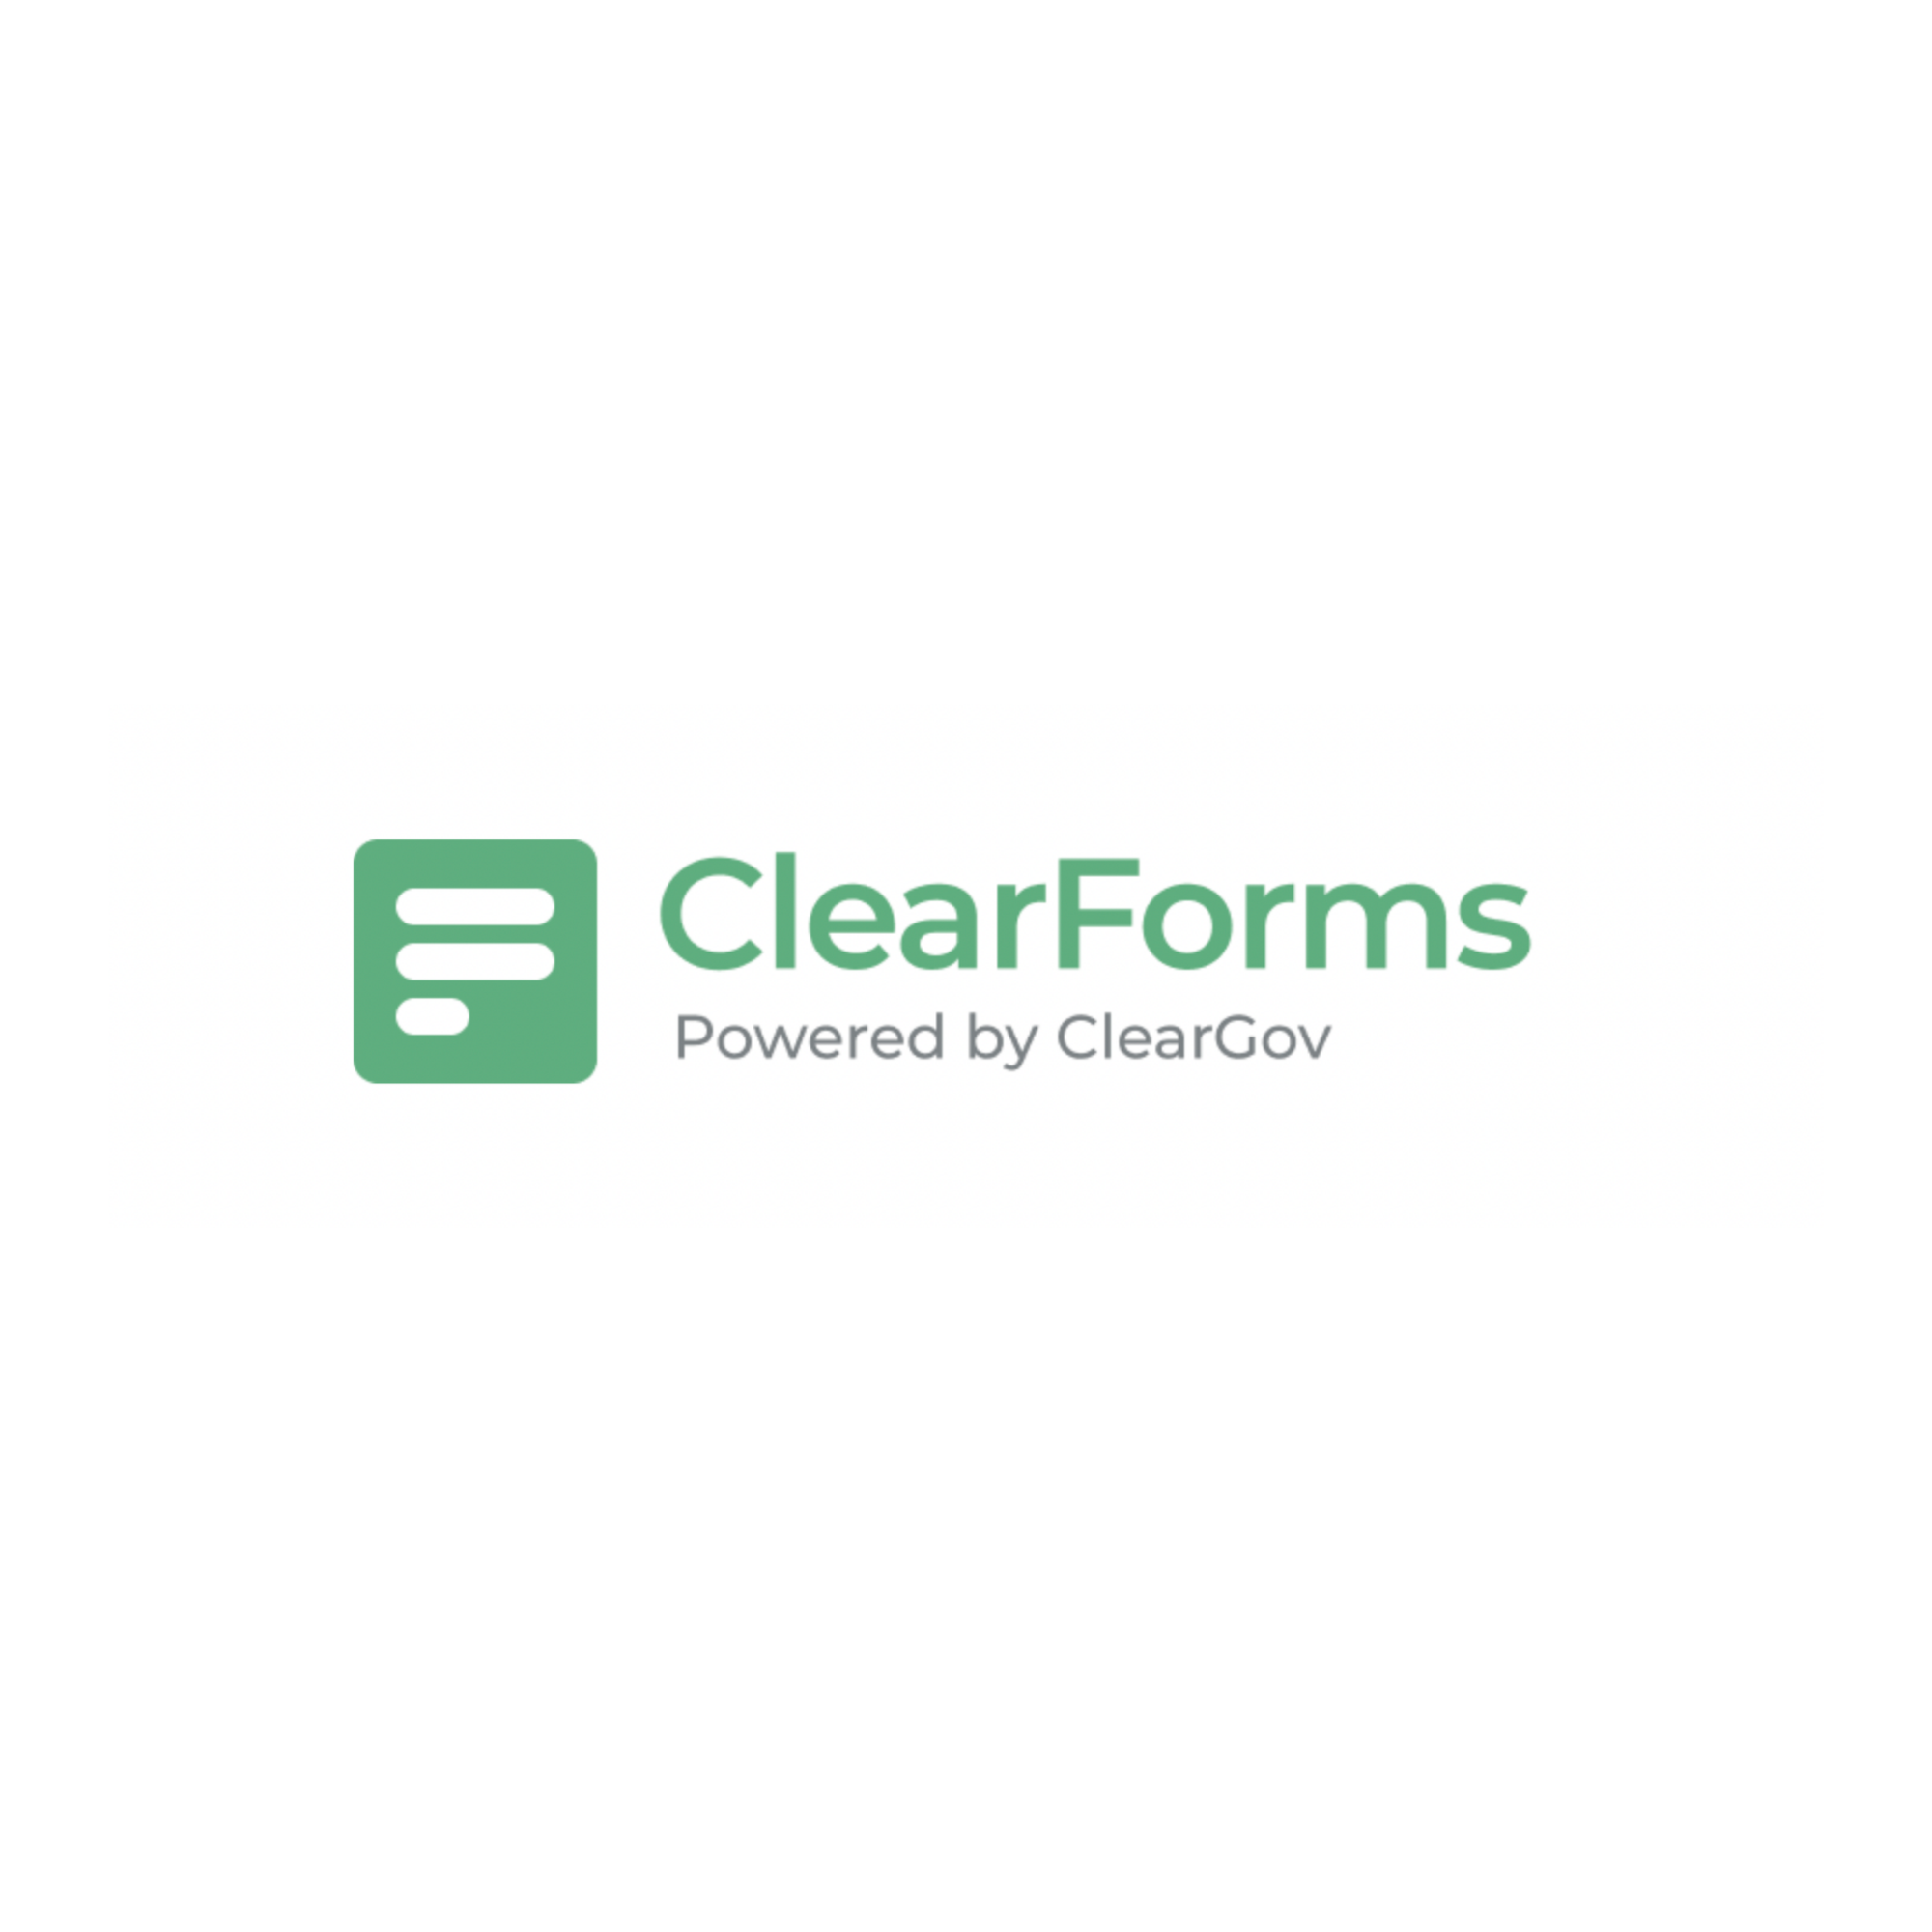 ClearForms